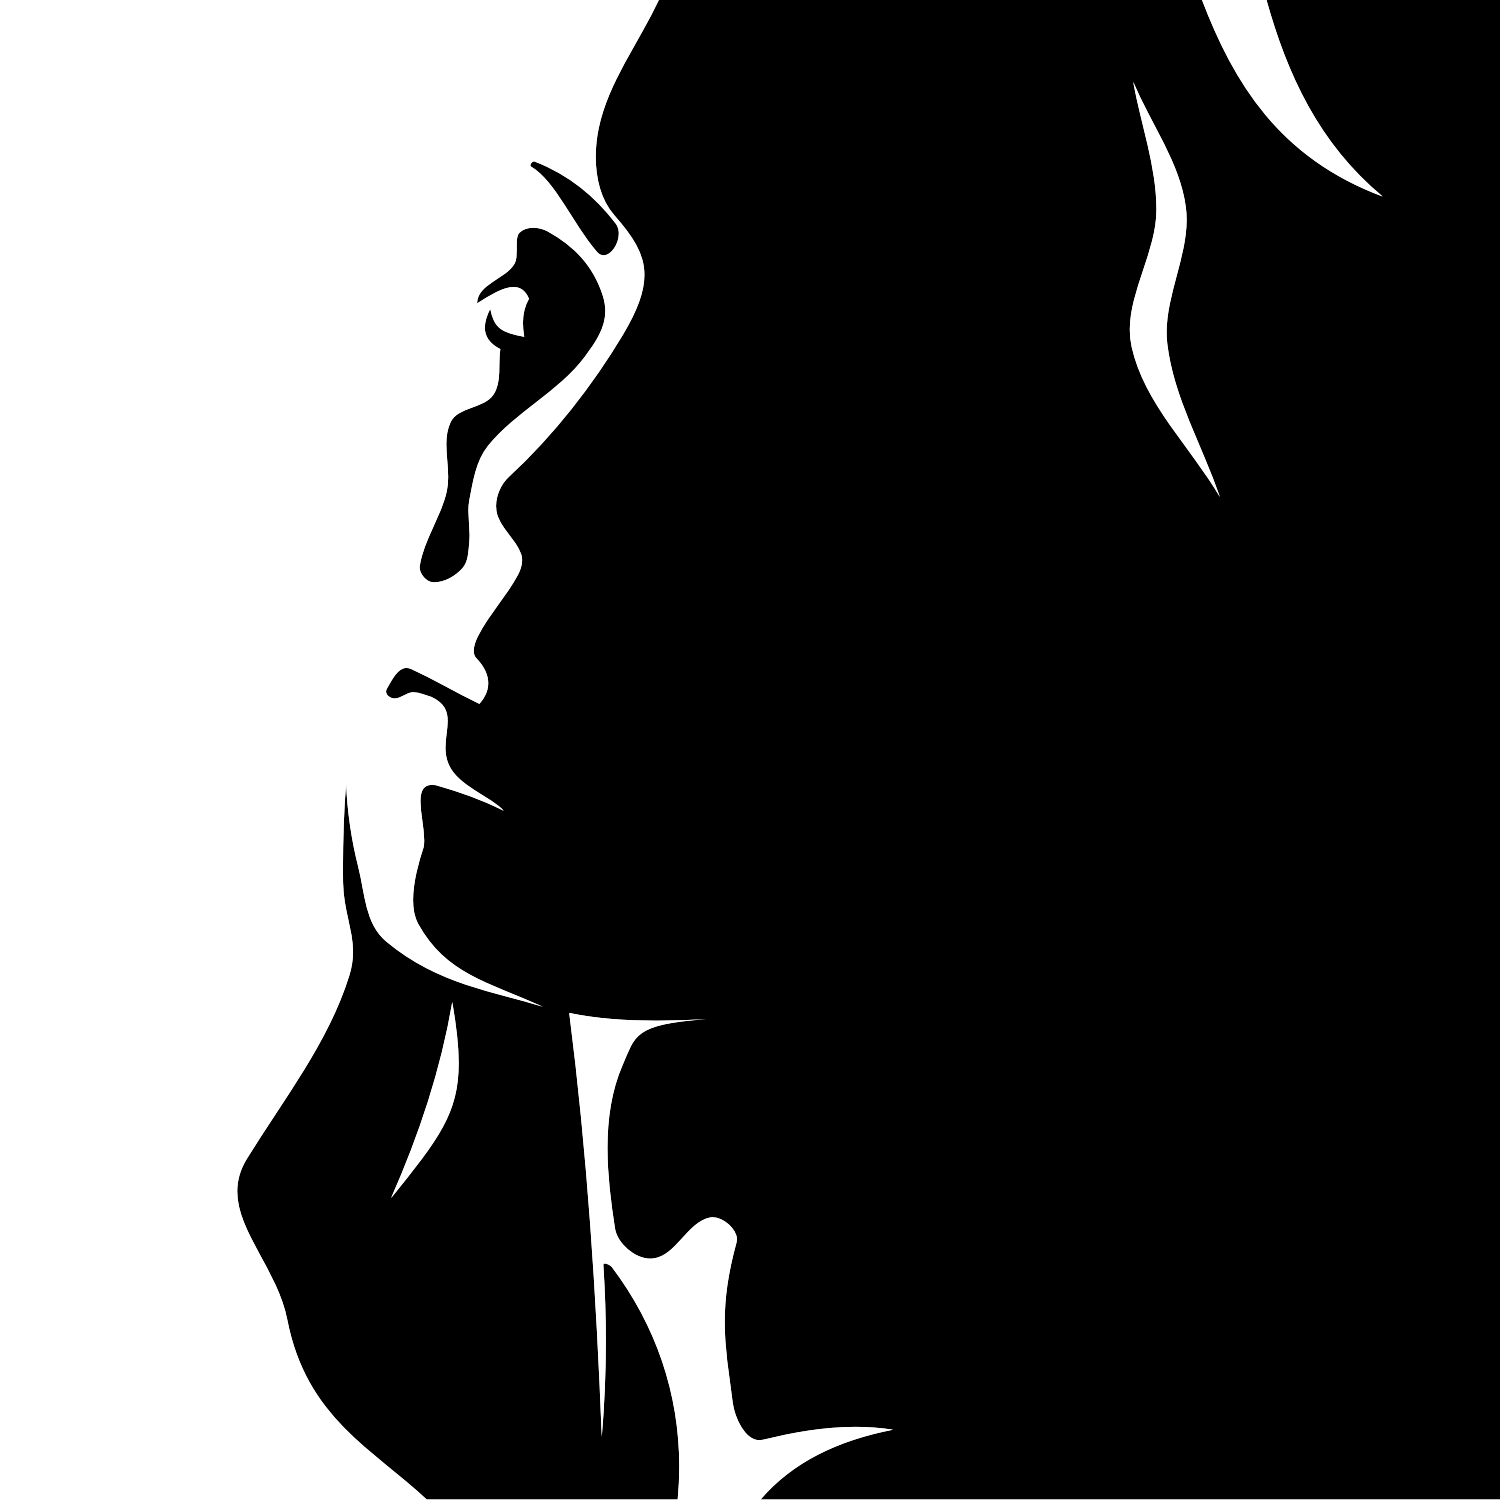 Woman Face Silhouette Free Vector at GetDrawings | Free download